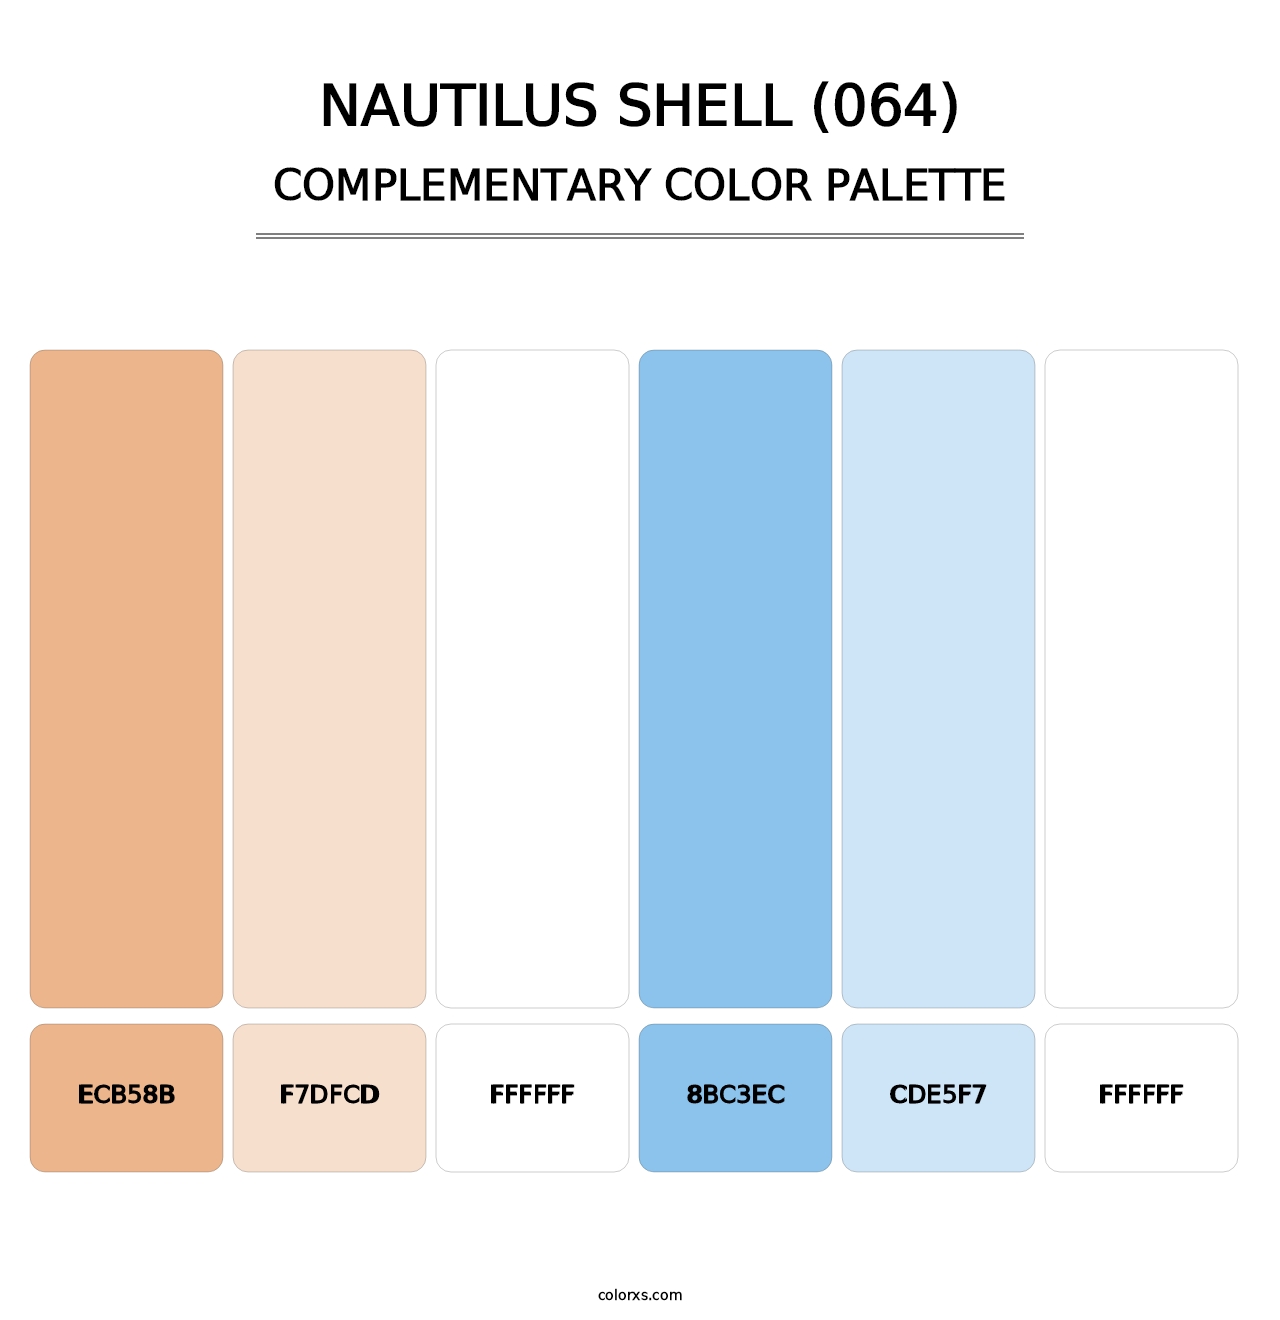 Nautilus Shell (064) - Complementary Color Palette